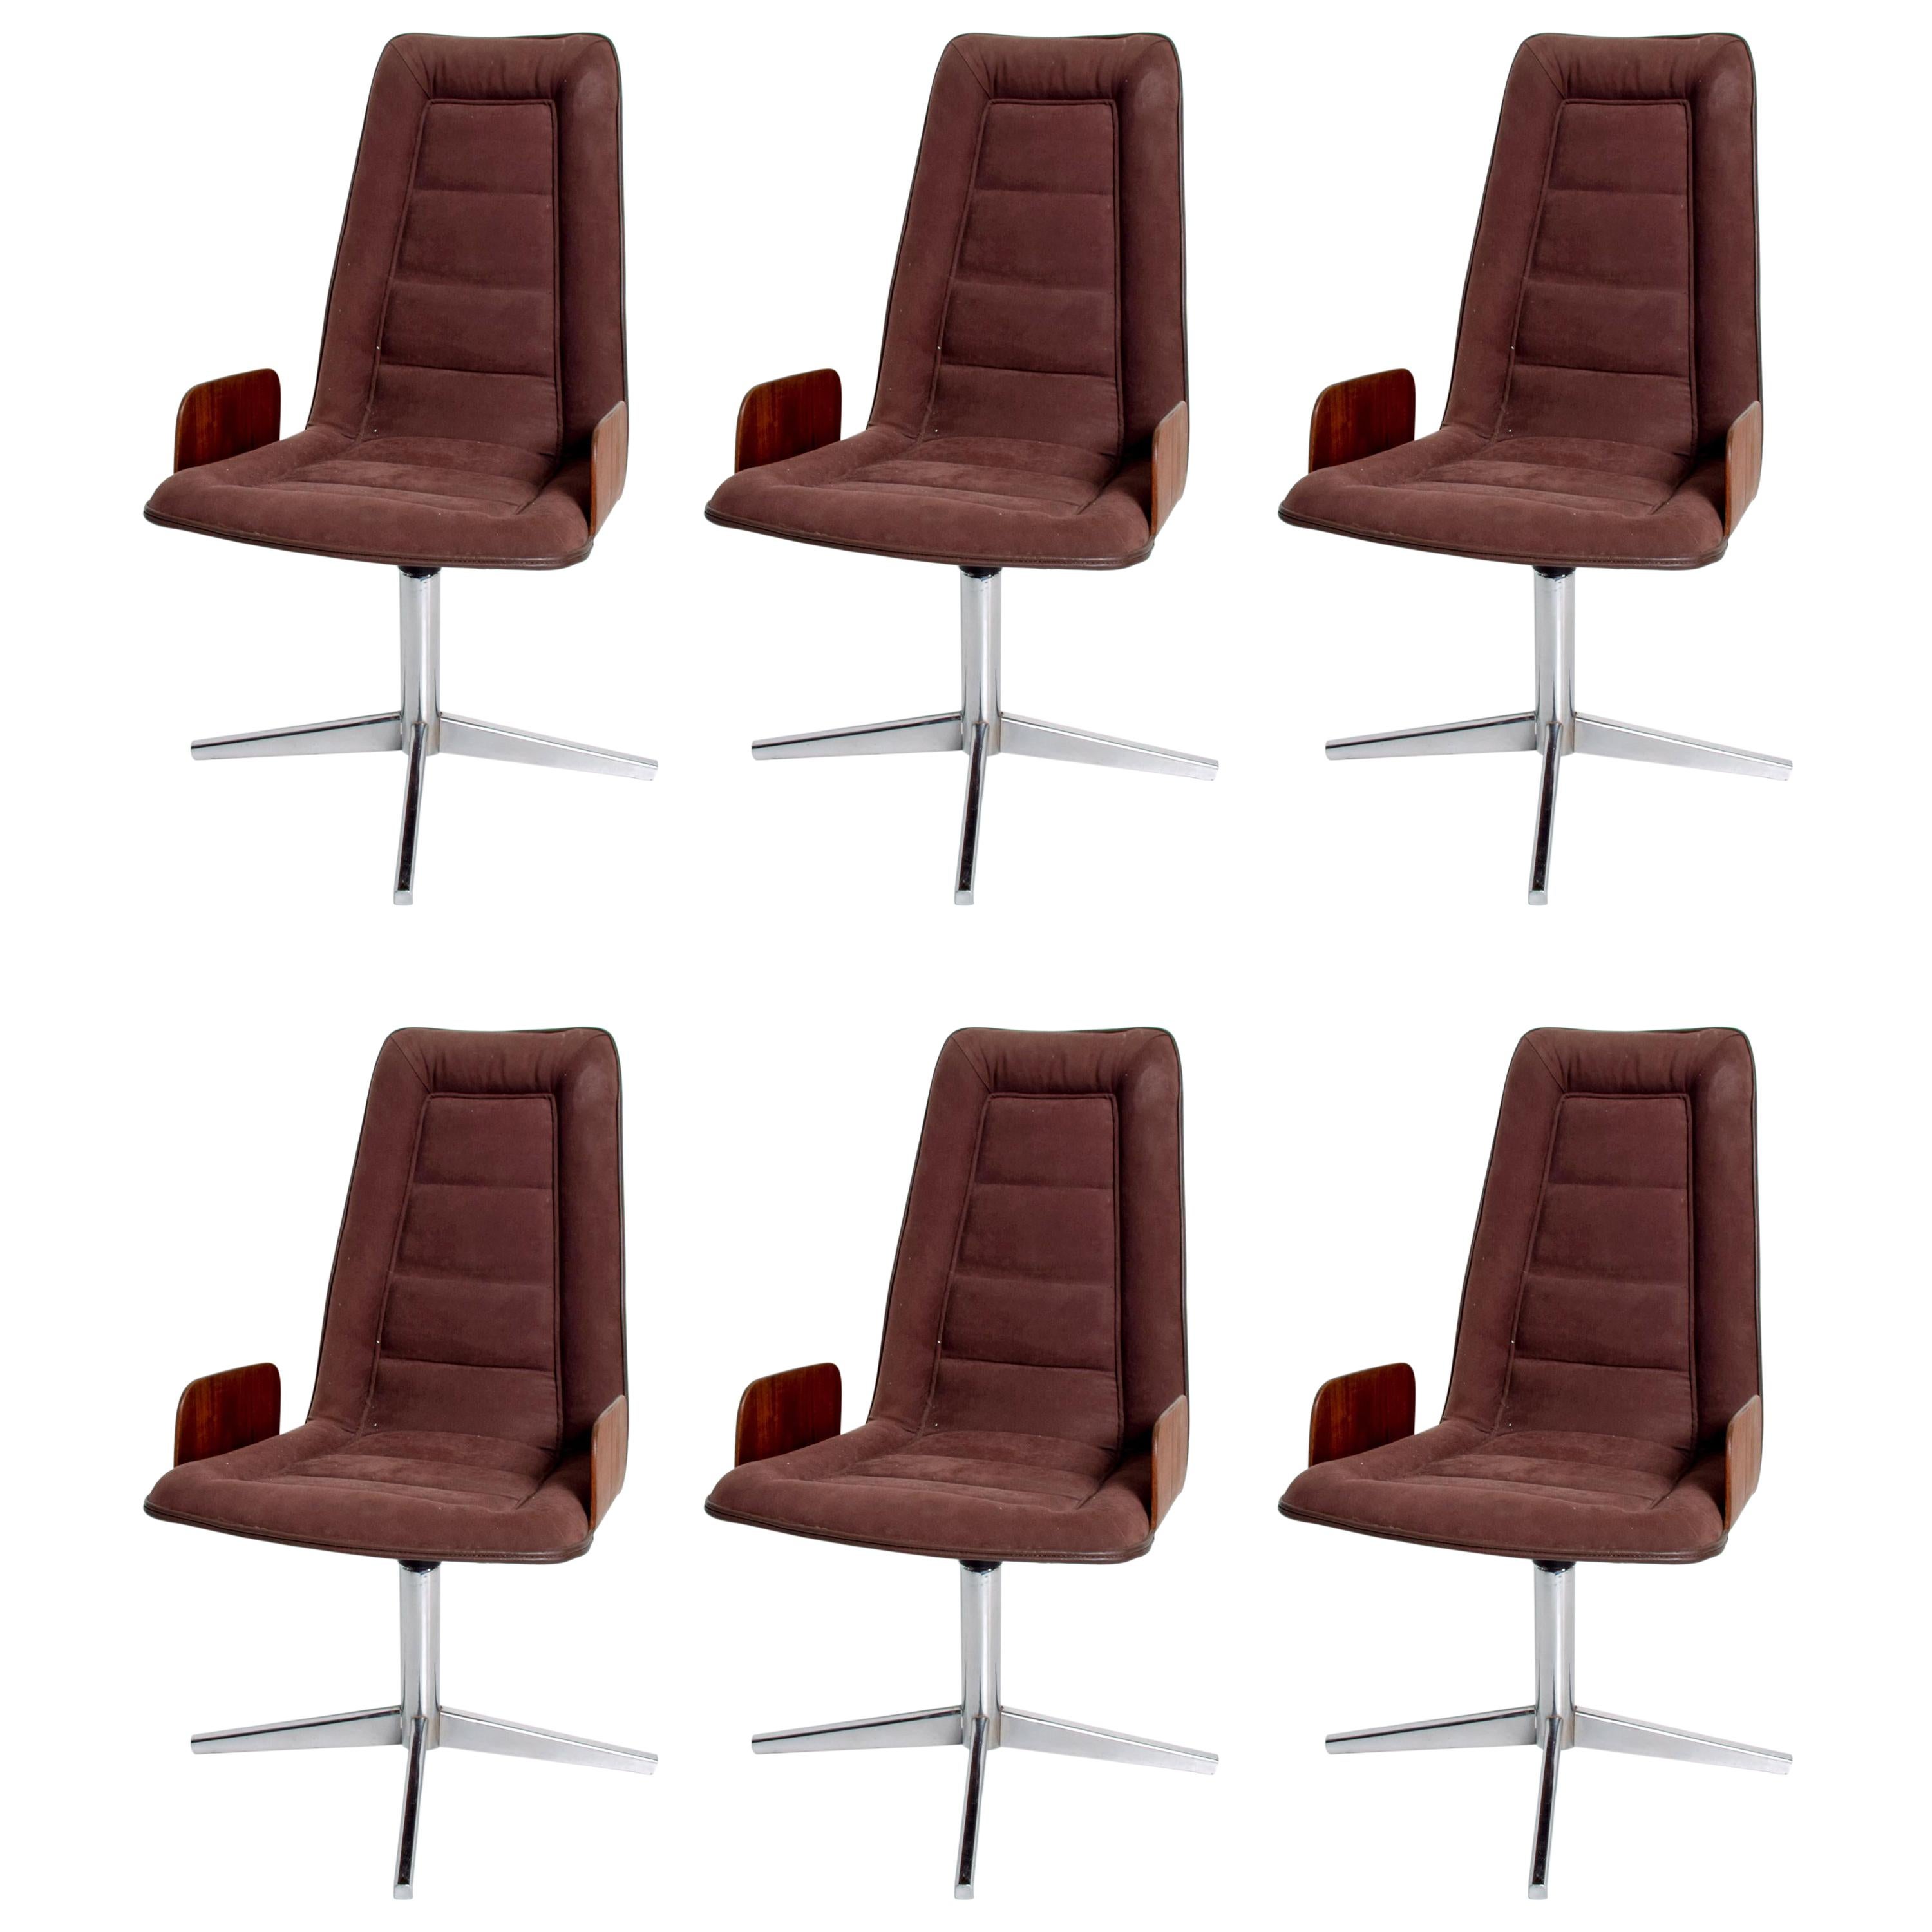 Sculptural Bent Walnut Plywood Dining Chairs Set of Six Mid-Century Modern